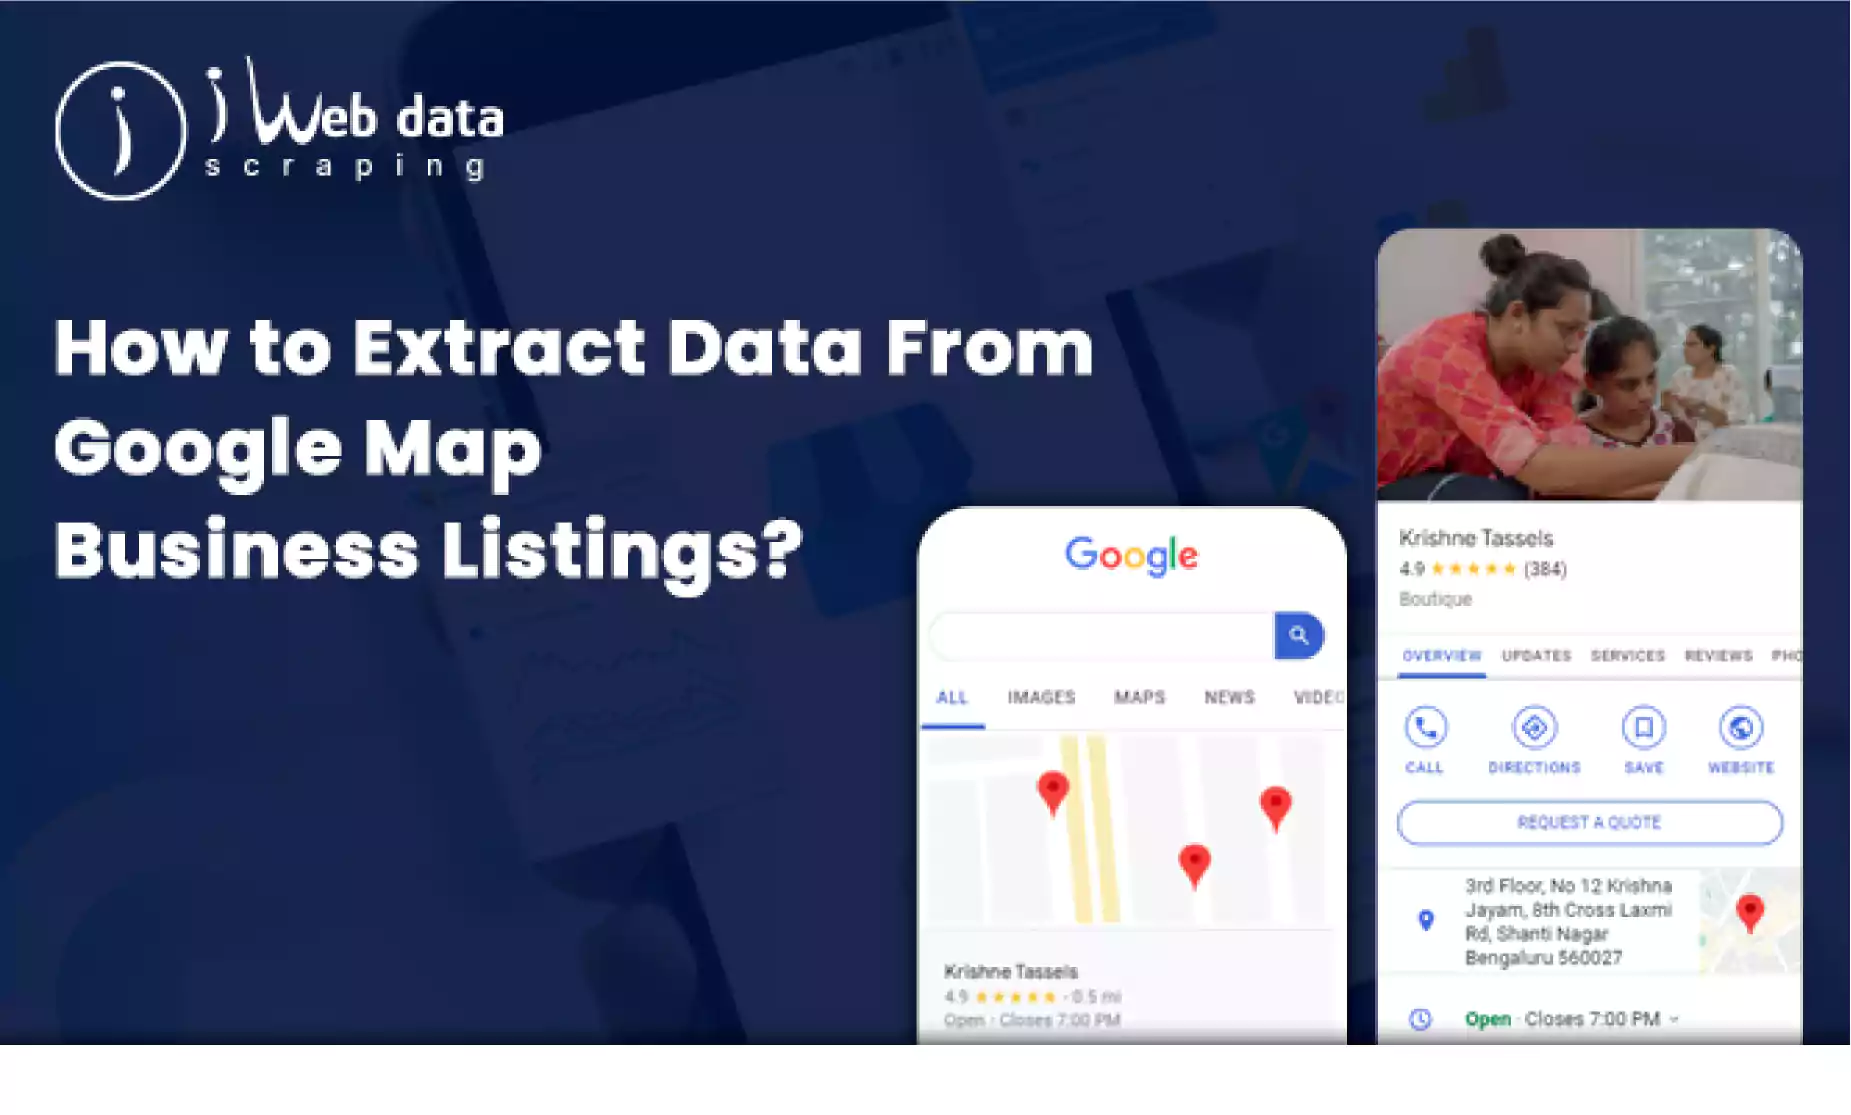 Thumb-How-to-Extract-Data-From-Google-Map-Business-Listings.png